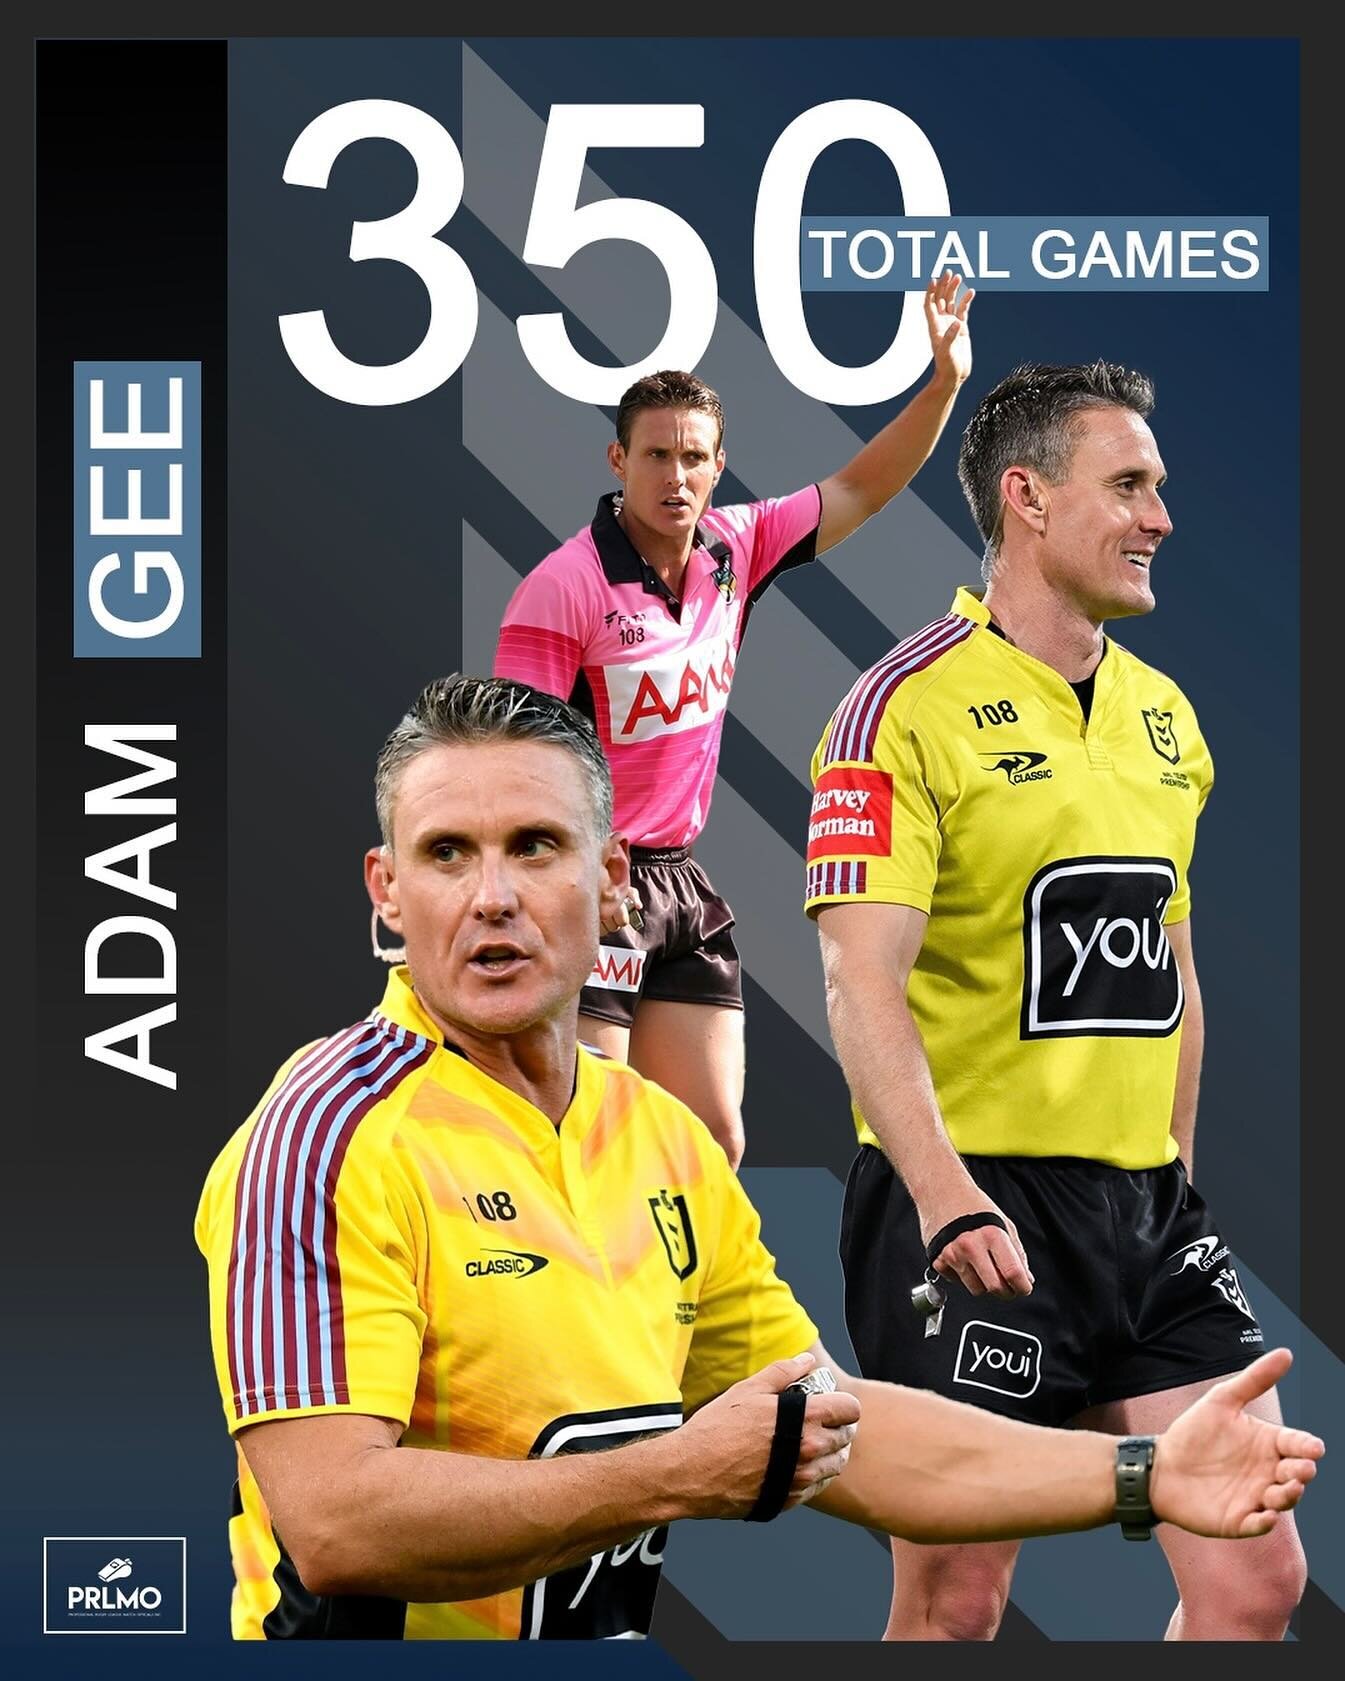 NRL Game 3️⃣5️⃣0️⃣ for G-Man 🙌

Adam Gee will officiate in NRL game 350 of his career today, when he serves as the Bunker Review Official for the Knights v Dragons clash at McDonald Jones Stadium.

In a career that has spanned more than a decade, Ad